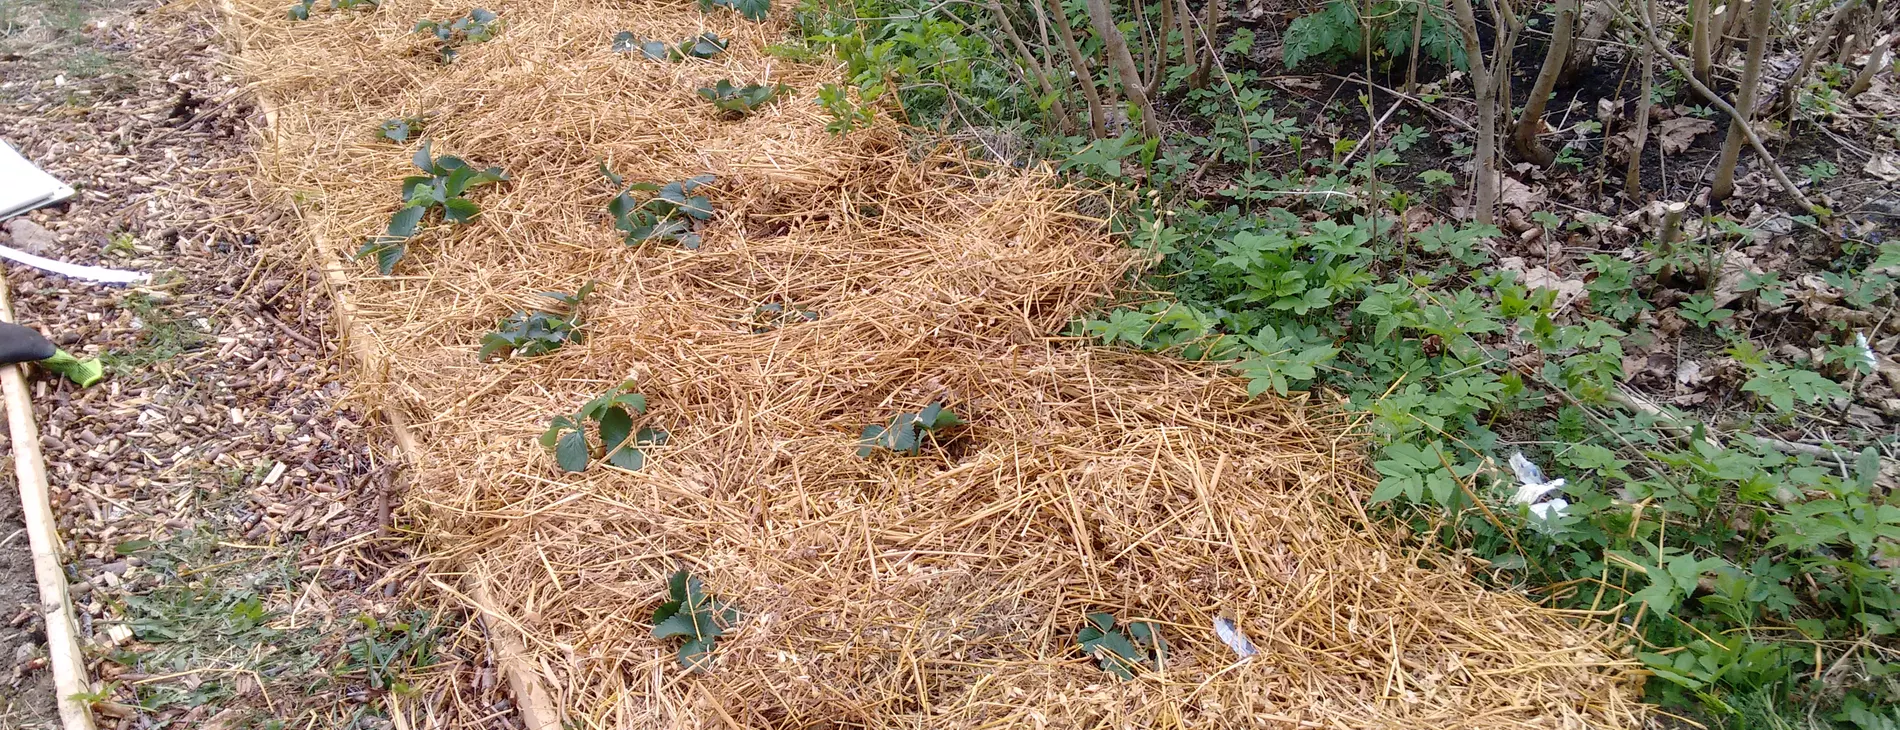 Strawberry field with straw and newspaper covering the soil